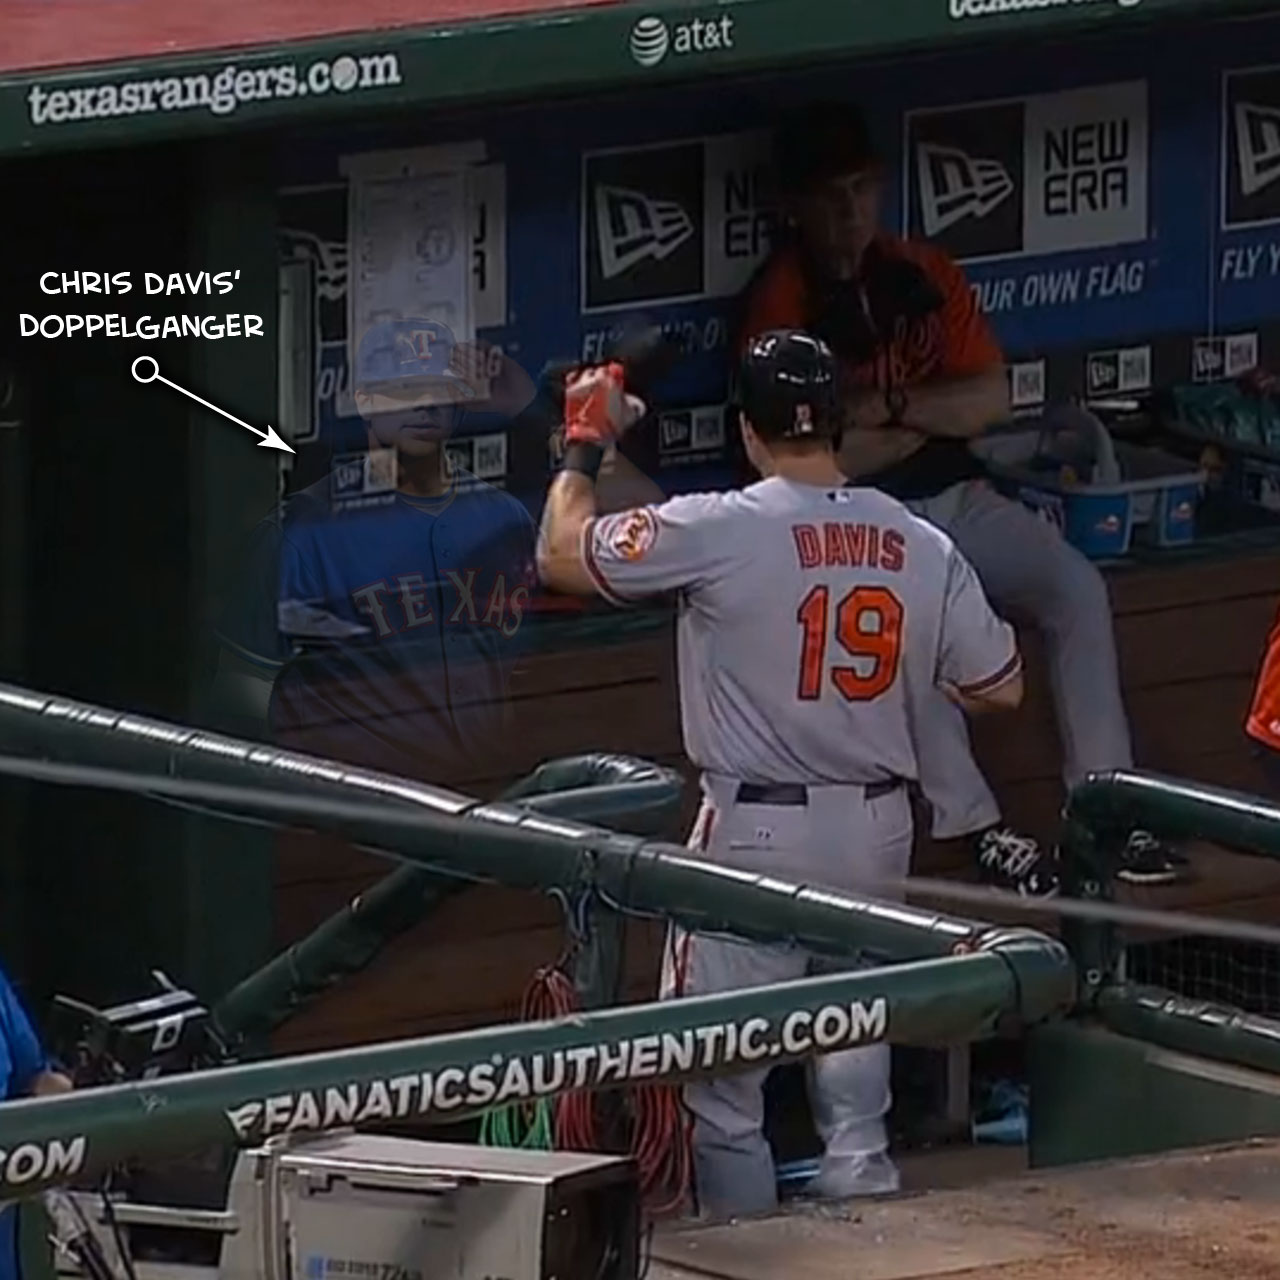 Chris Davis greeted by ghostly Chris Davis in dugout.